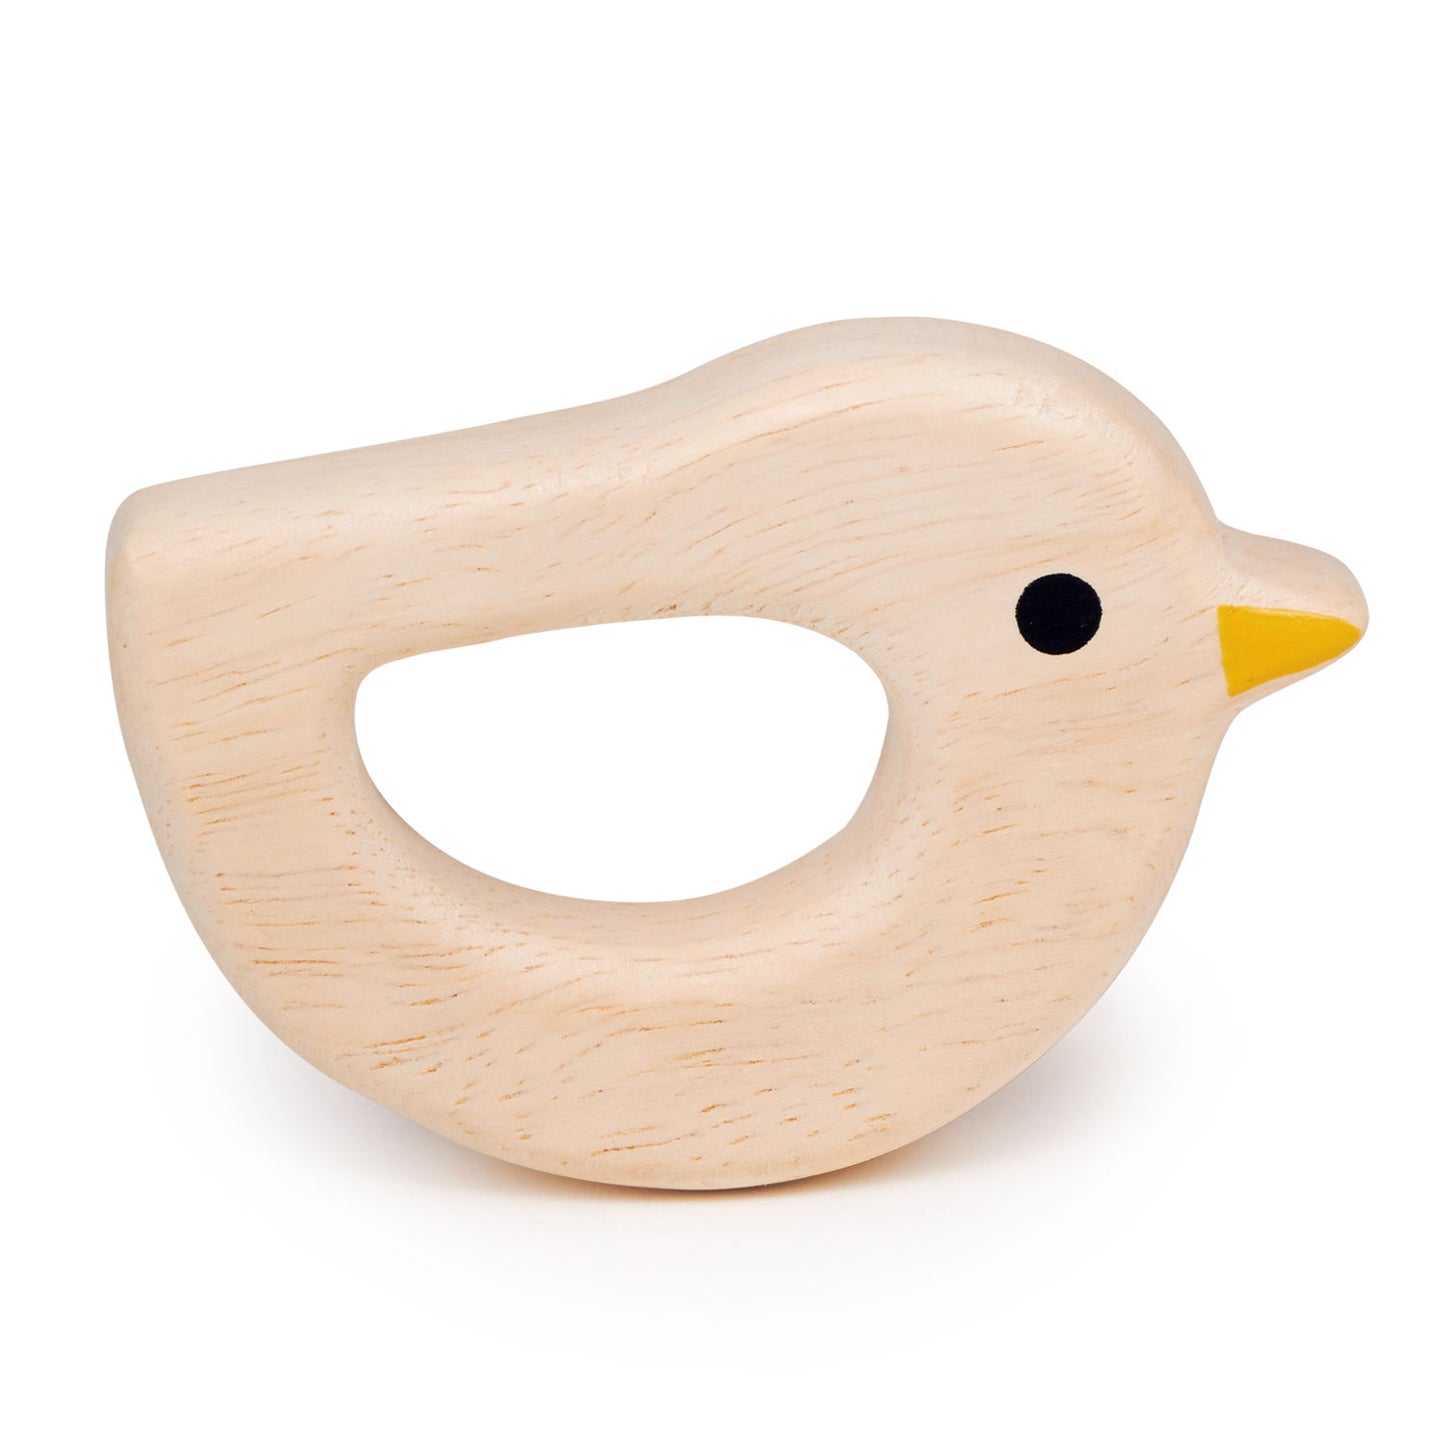 Wooden teether for a baby in the shape of a bird 